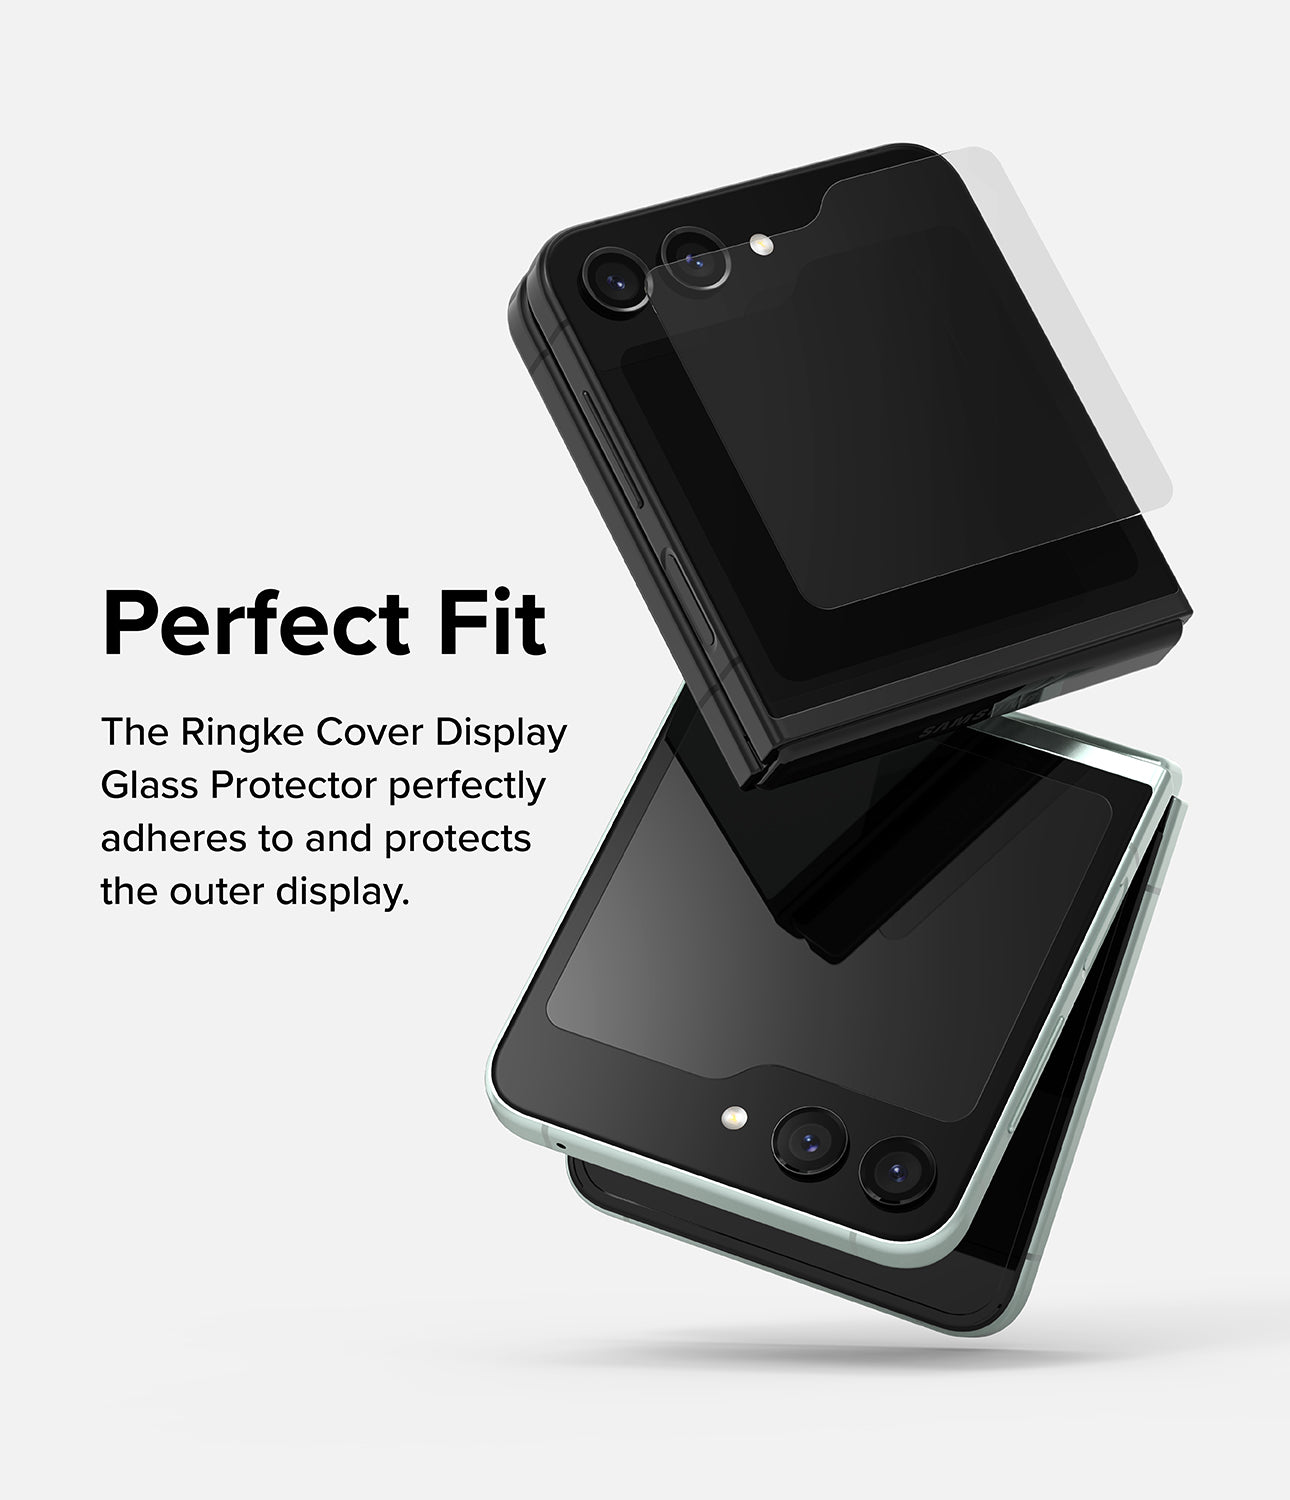 Galaxy Z Flip 5 Screen Protector | Cover Display Glass